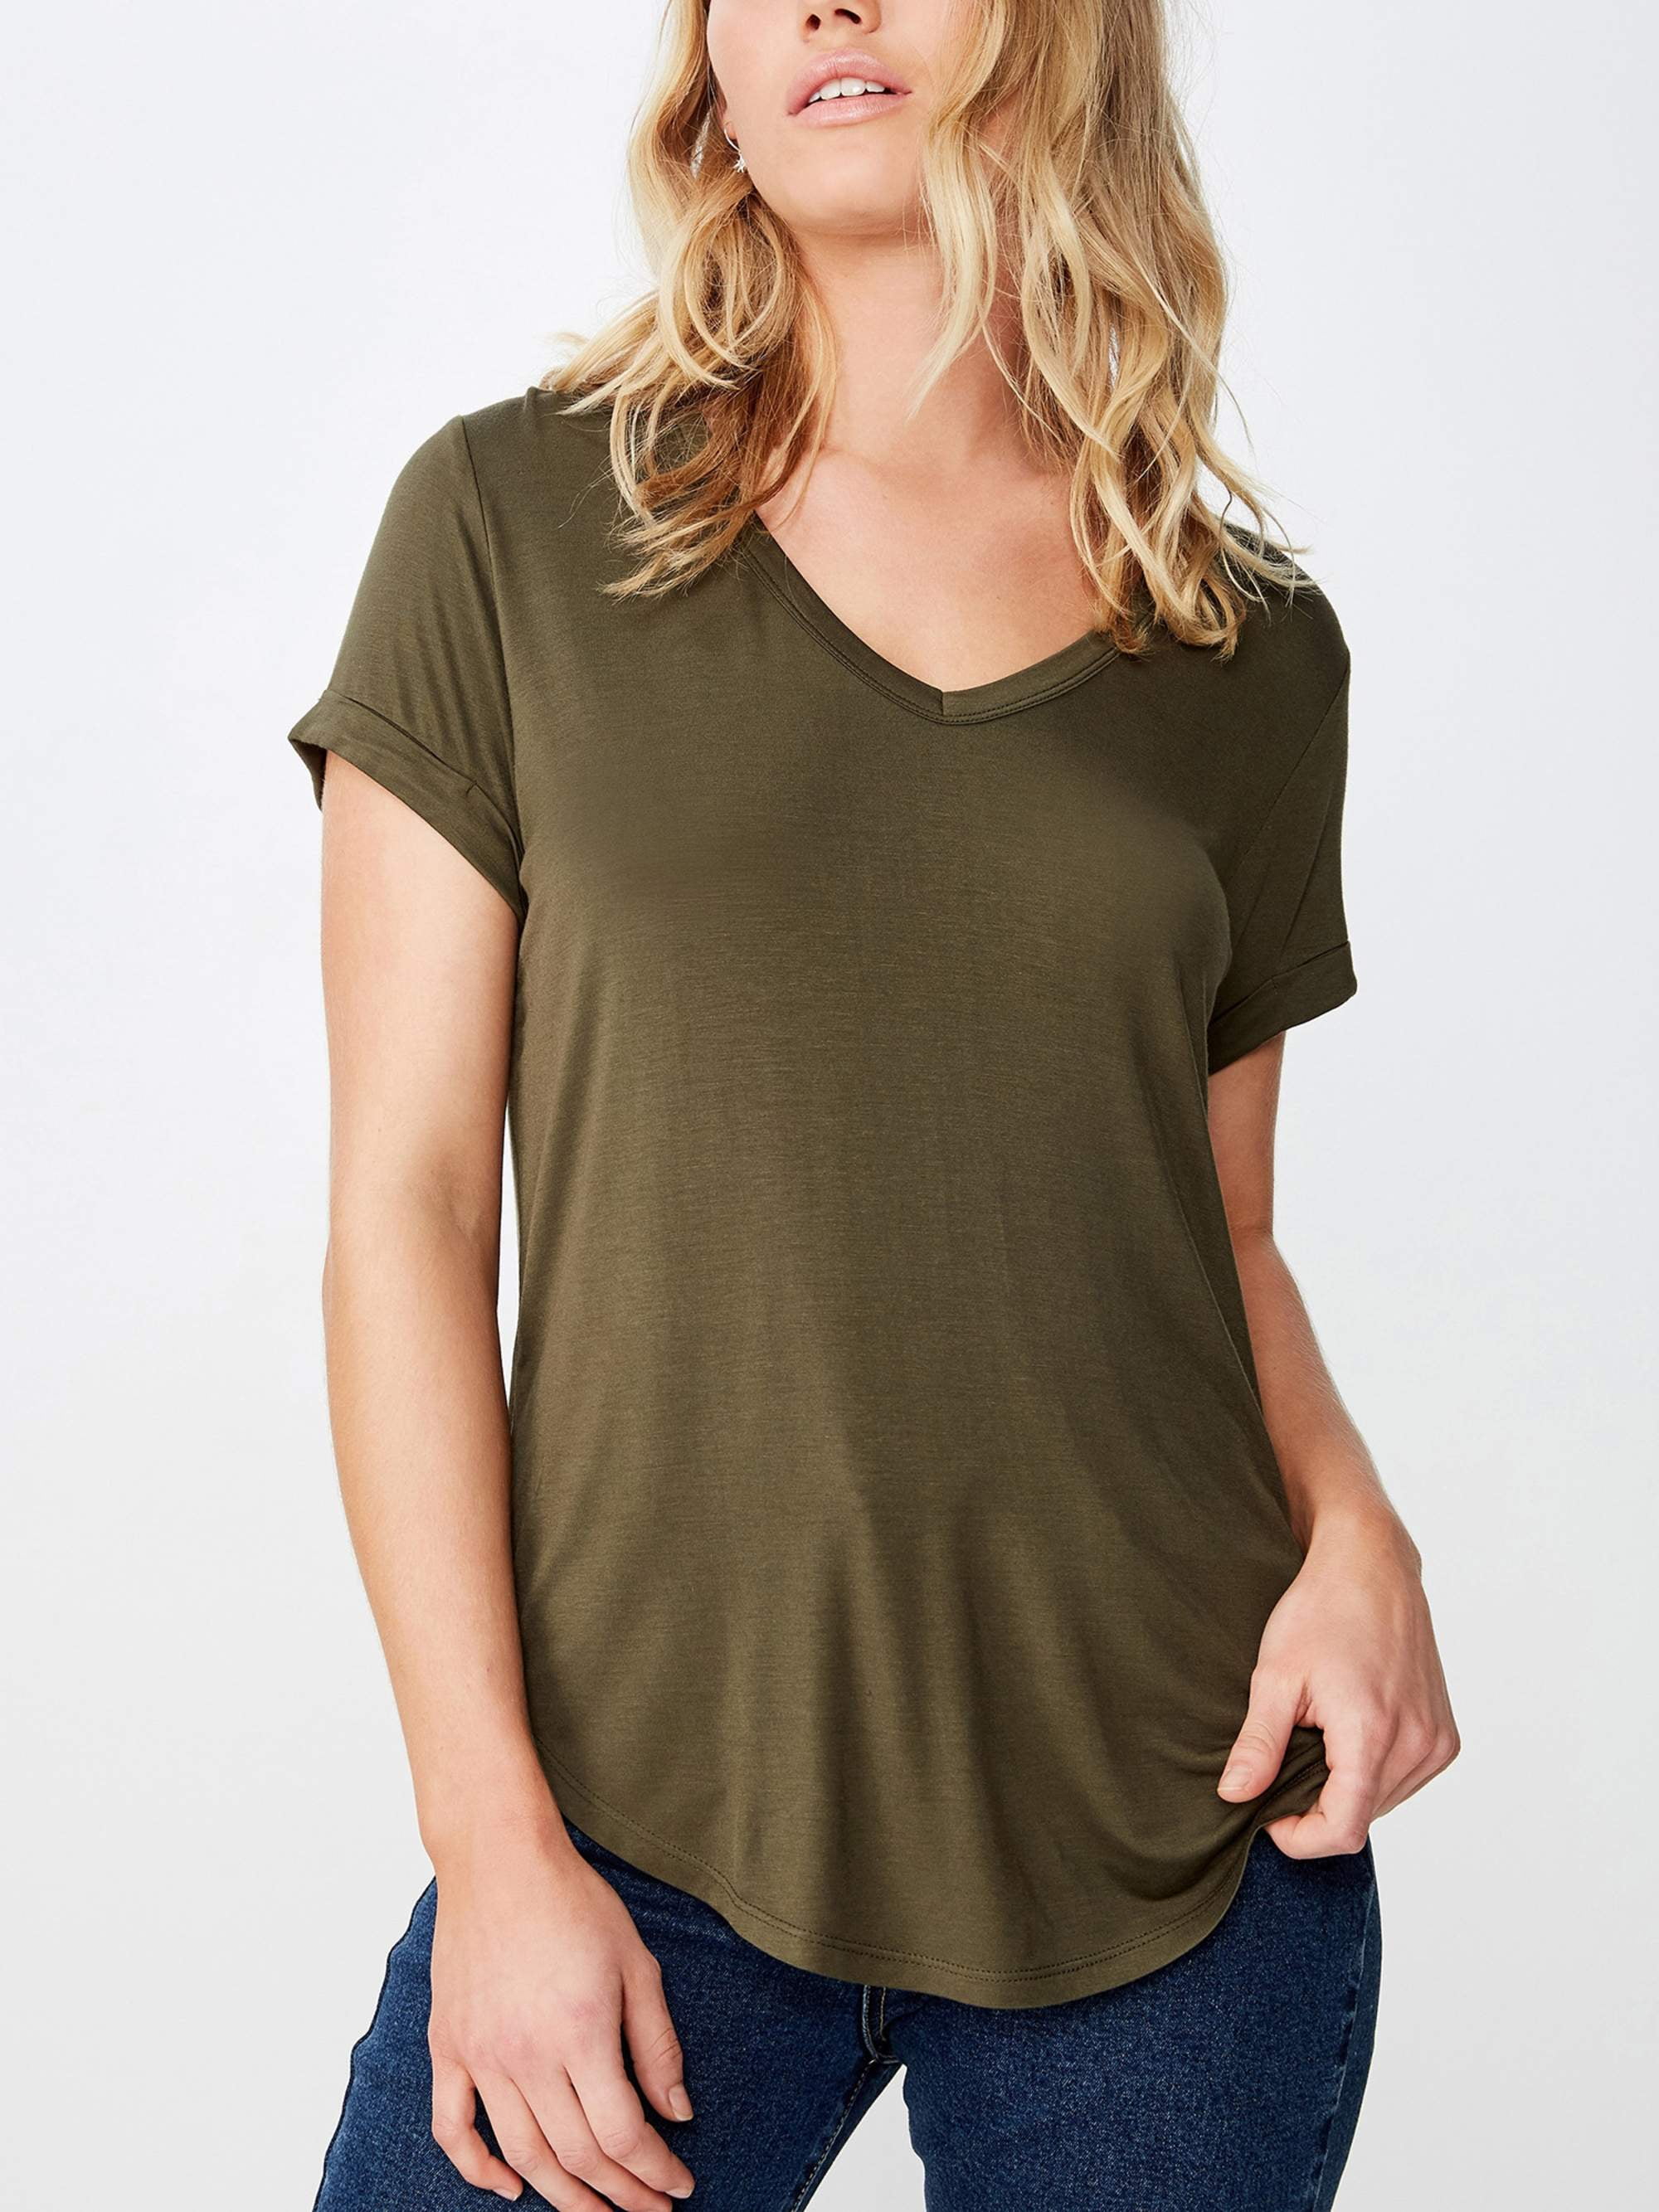 Cotton On Juniors' Karly Short Sleeve V Neck Top